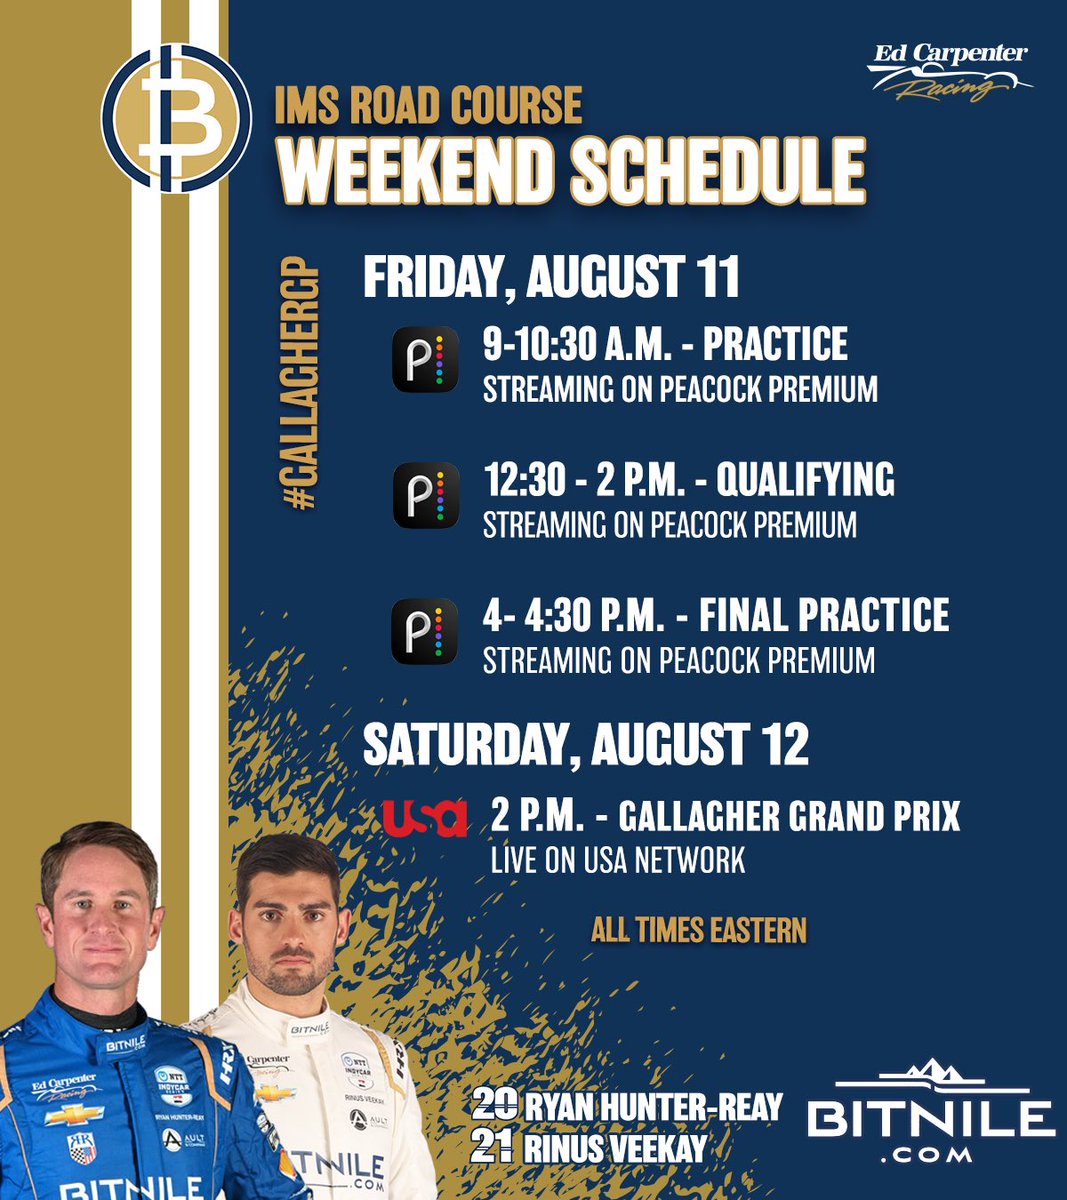 [Weekend Schedule] - Back Home Again at @IMS! An absolutely action-packed two days will culminate with our second race of the year on our hometown road course! #GallagherGP #INDYCAR #BitnileWorld #Bitnile #BitnileRacing